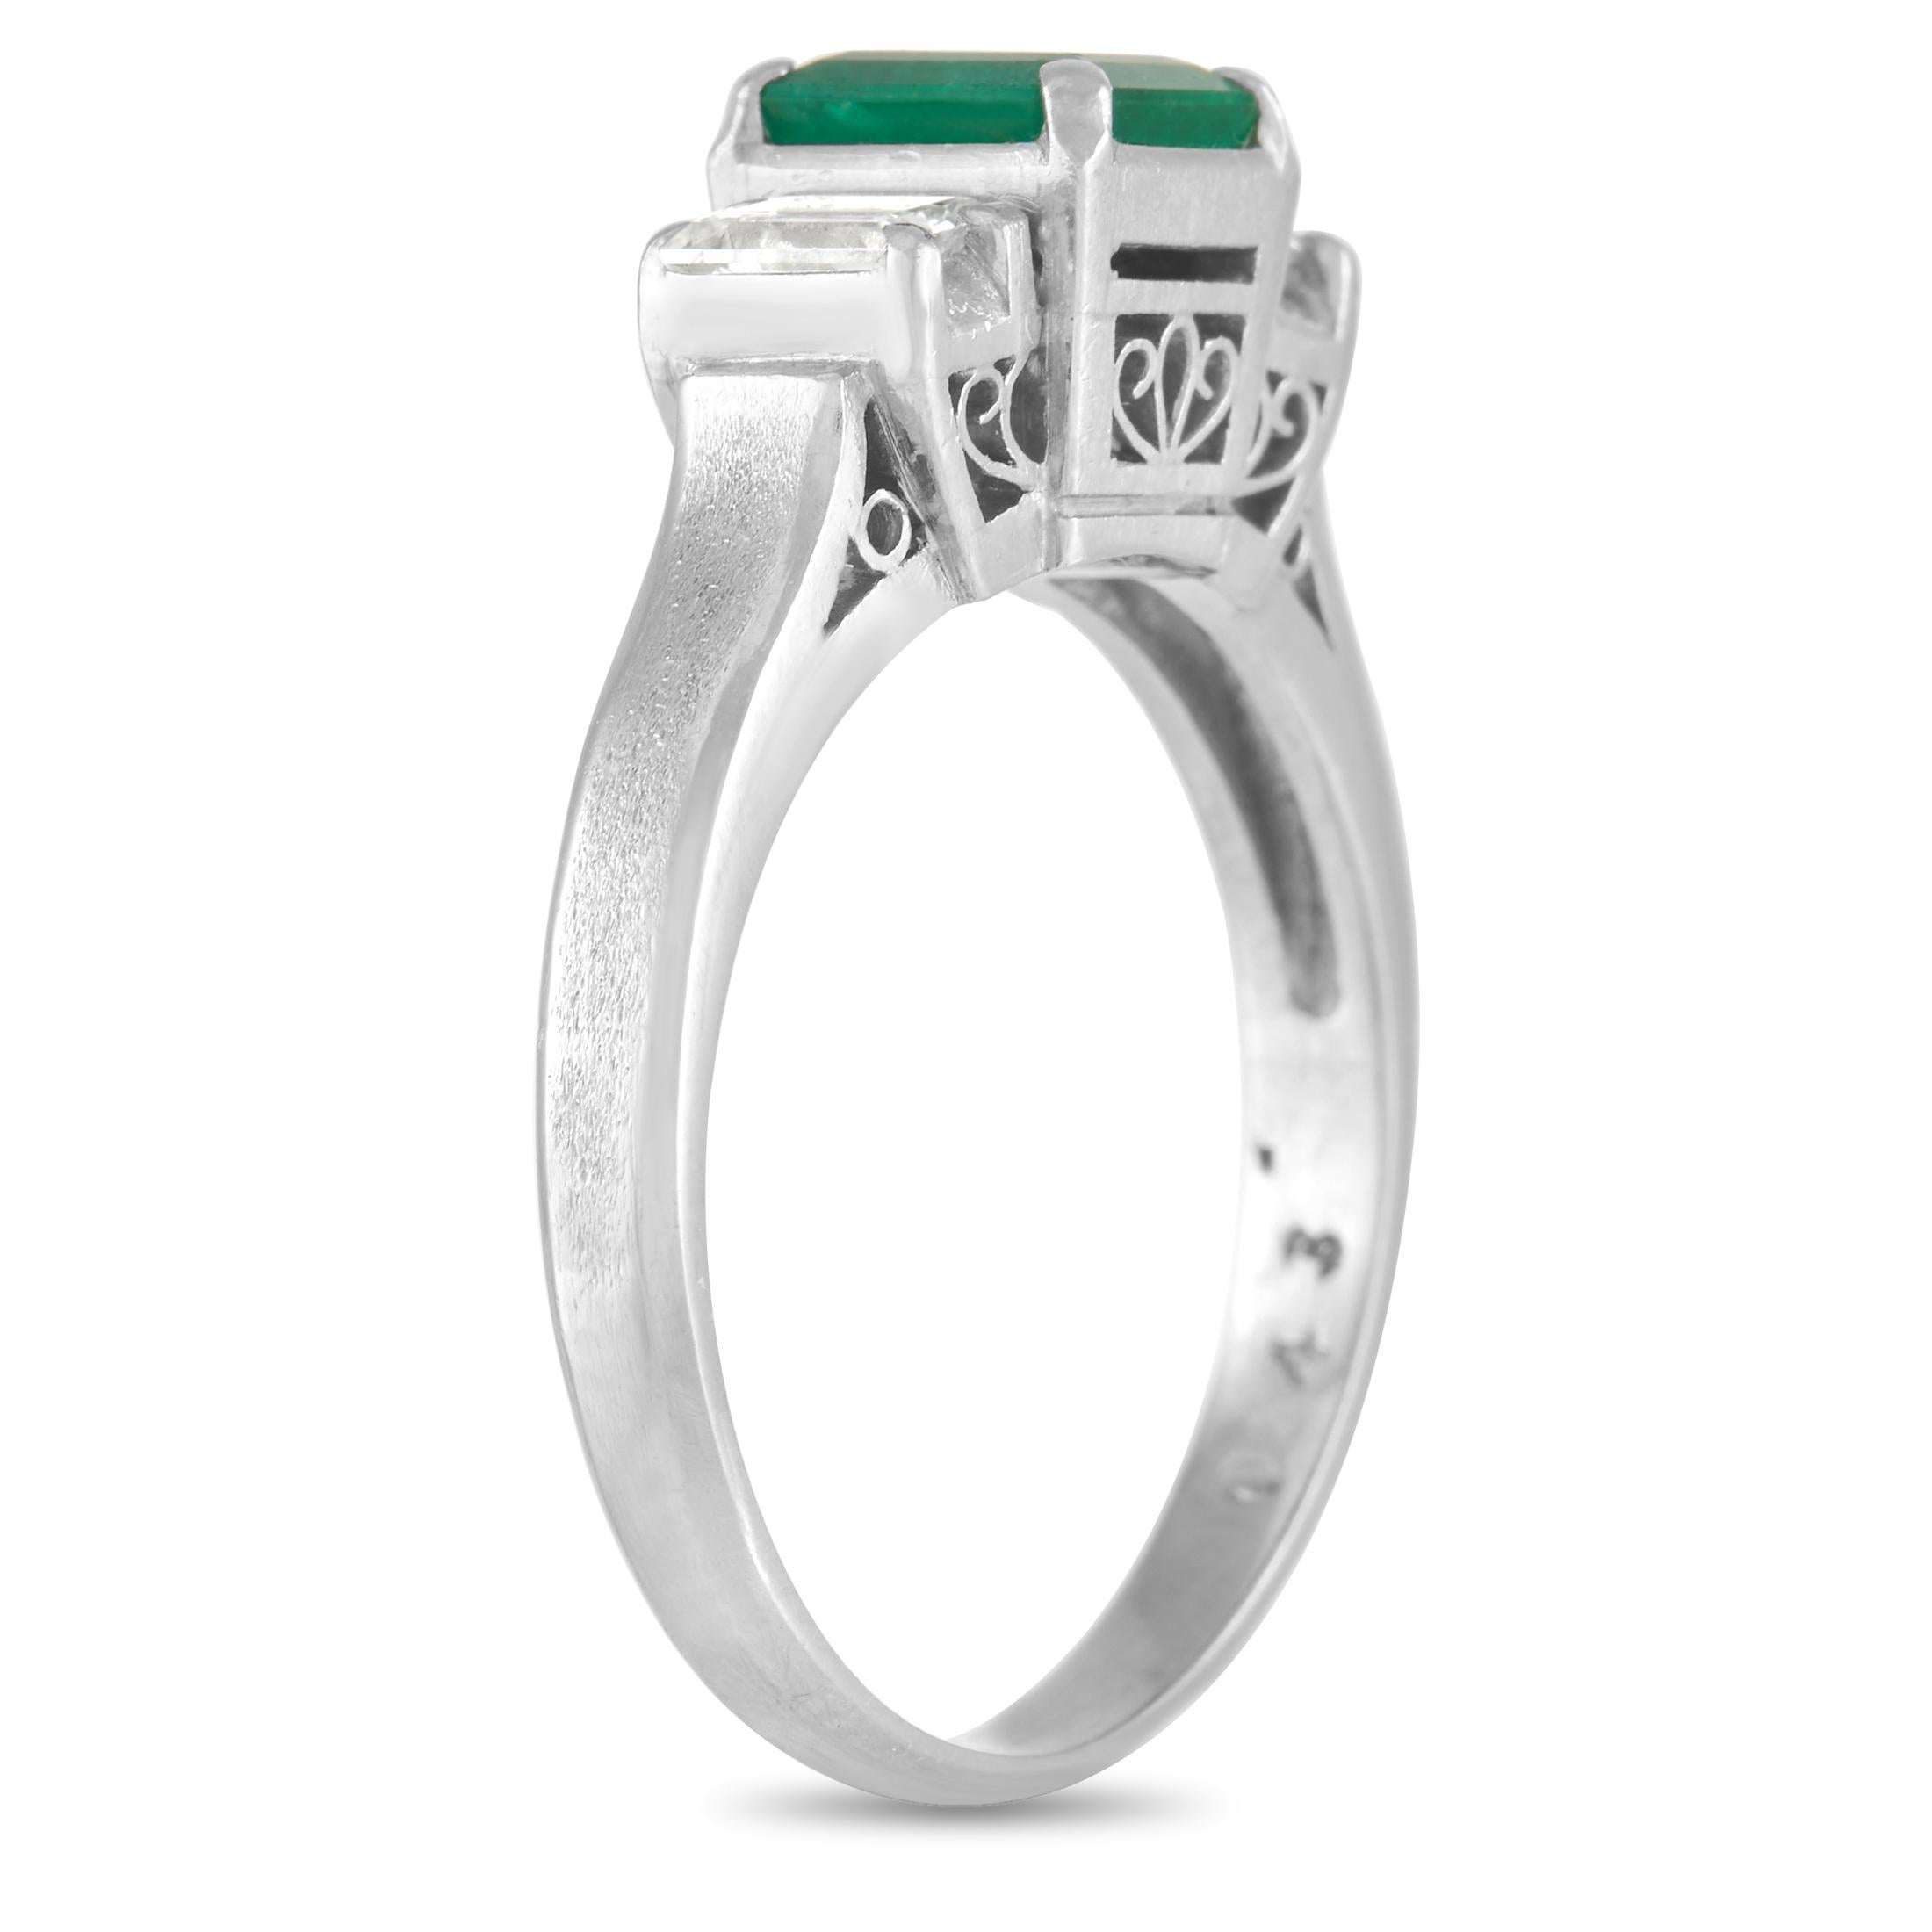 This estate ring possesses a certain old fashioned elegance. At the center of the platinum setting, you’ll find a 0.43 carat emerald gemstone with a captivating green color. It’s flanked by a pair of step-cut diamonds that together total 0.30